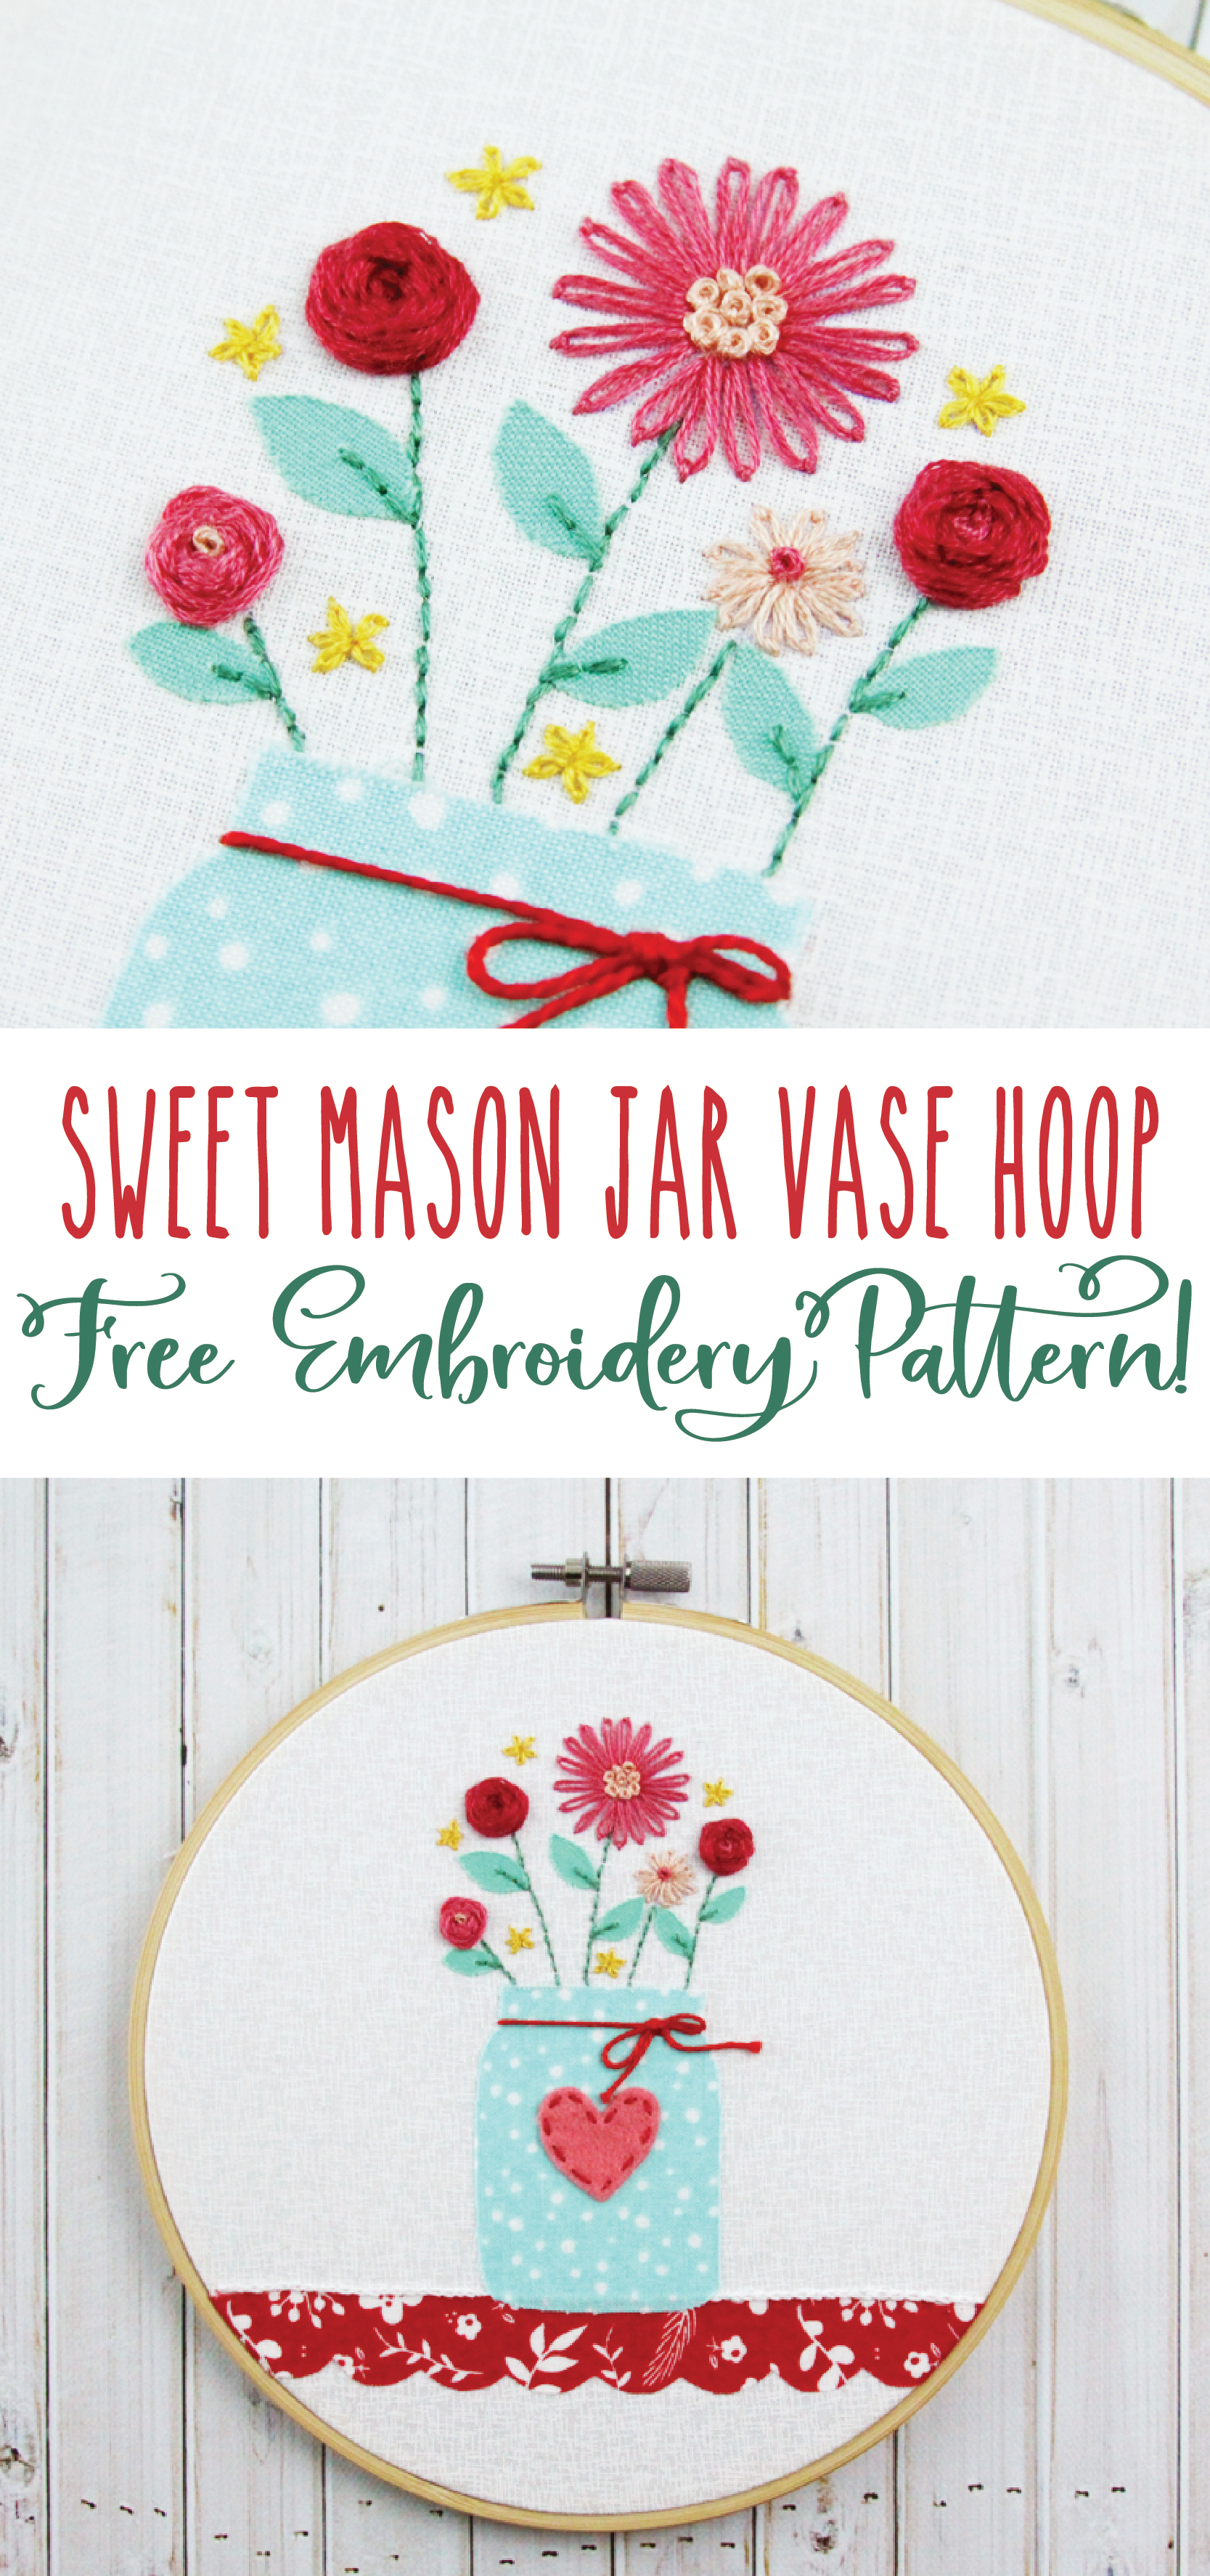 Embroidery On Paper Free Patterns Sweet Mason Jar Vase Hoop Free Embroidery Pattern